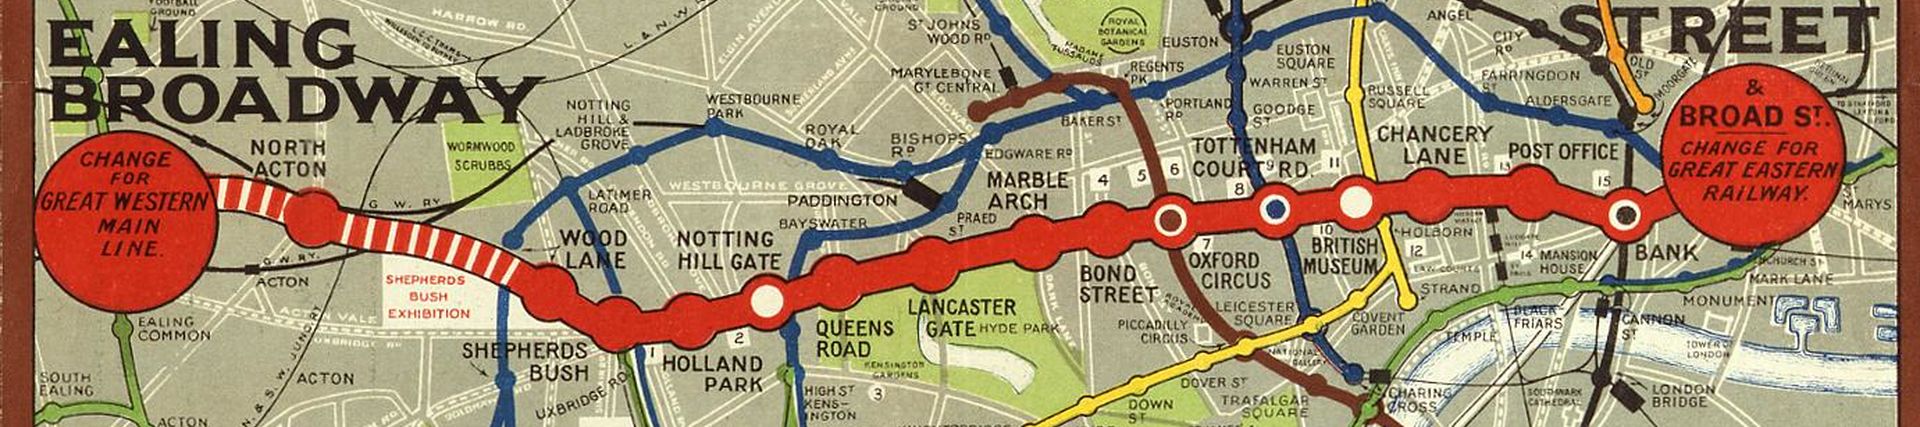 Central London Railway route map, 1912 